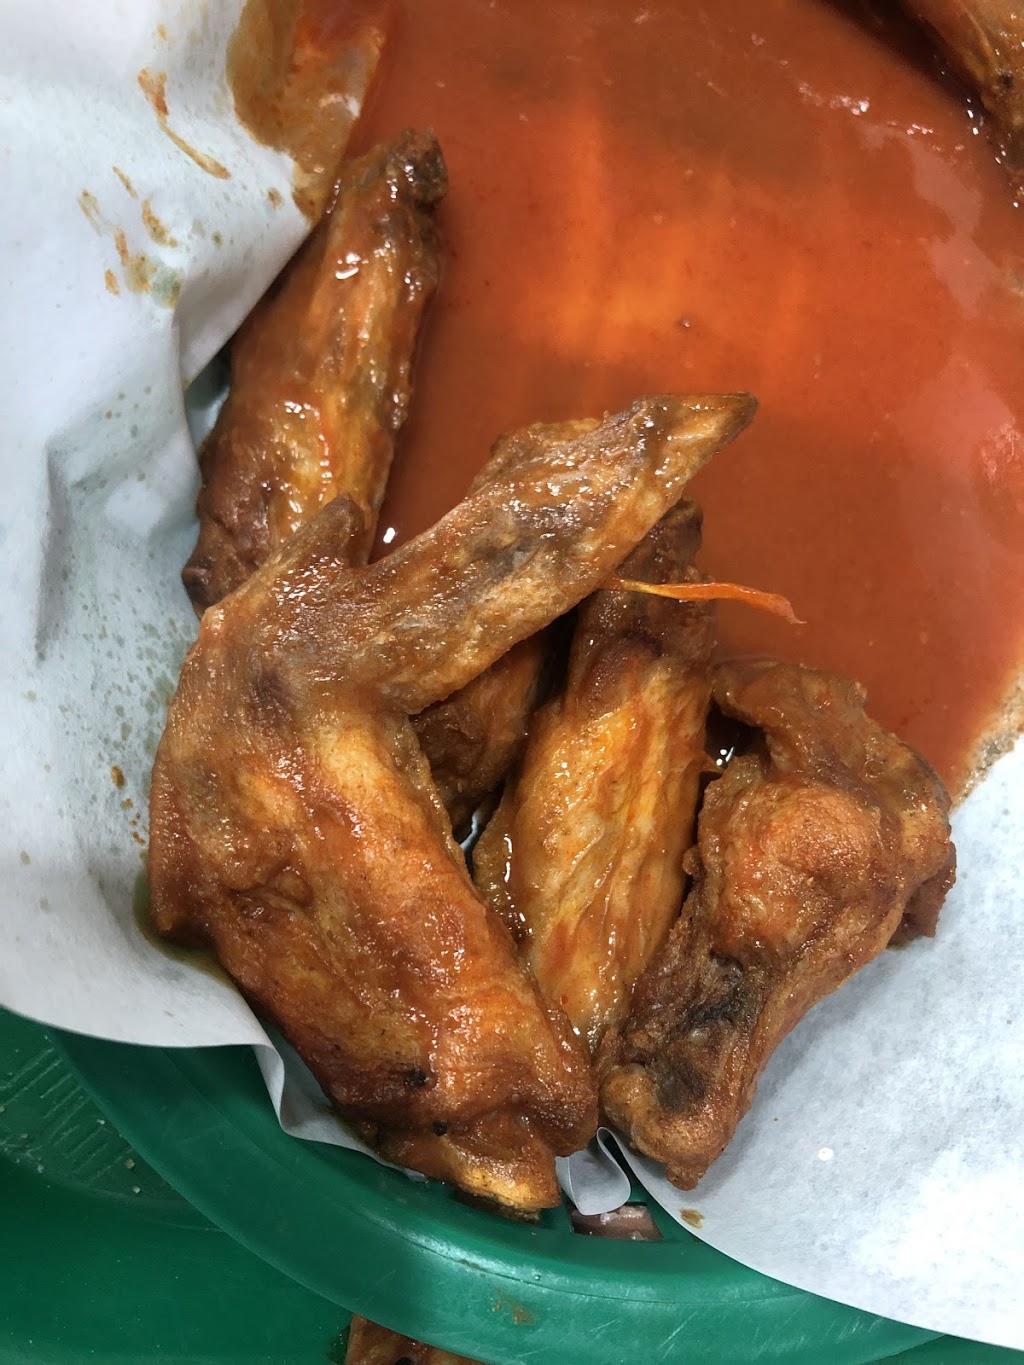 Pilot Wings | Calle Anáhuac 3411, Campestre, 88285 Nuevo Laredo, Tamps., Mexico | Phone: 867 715 3000